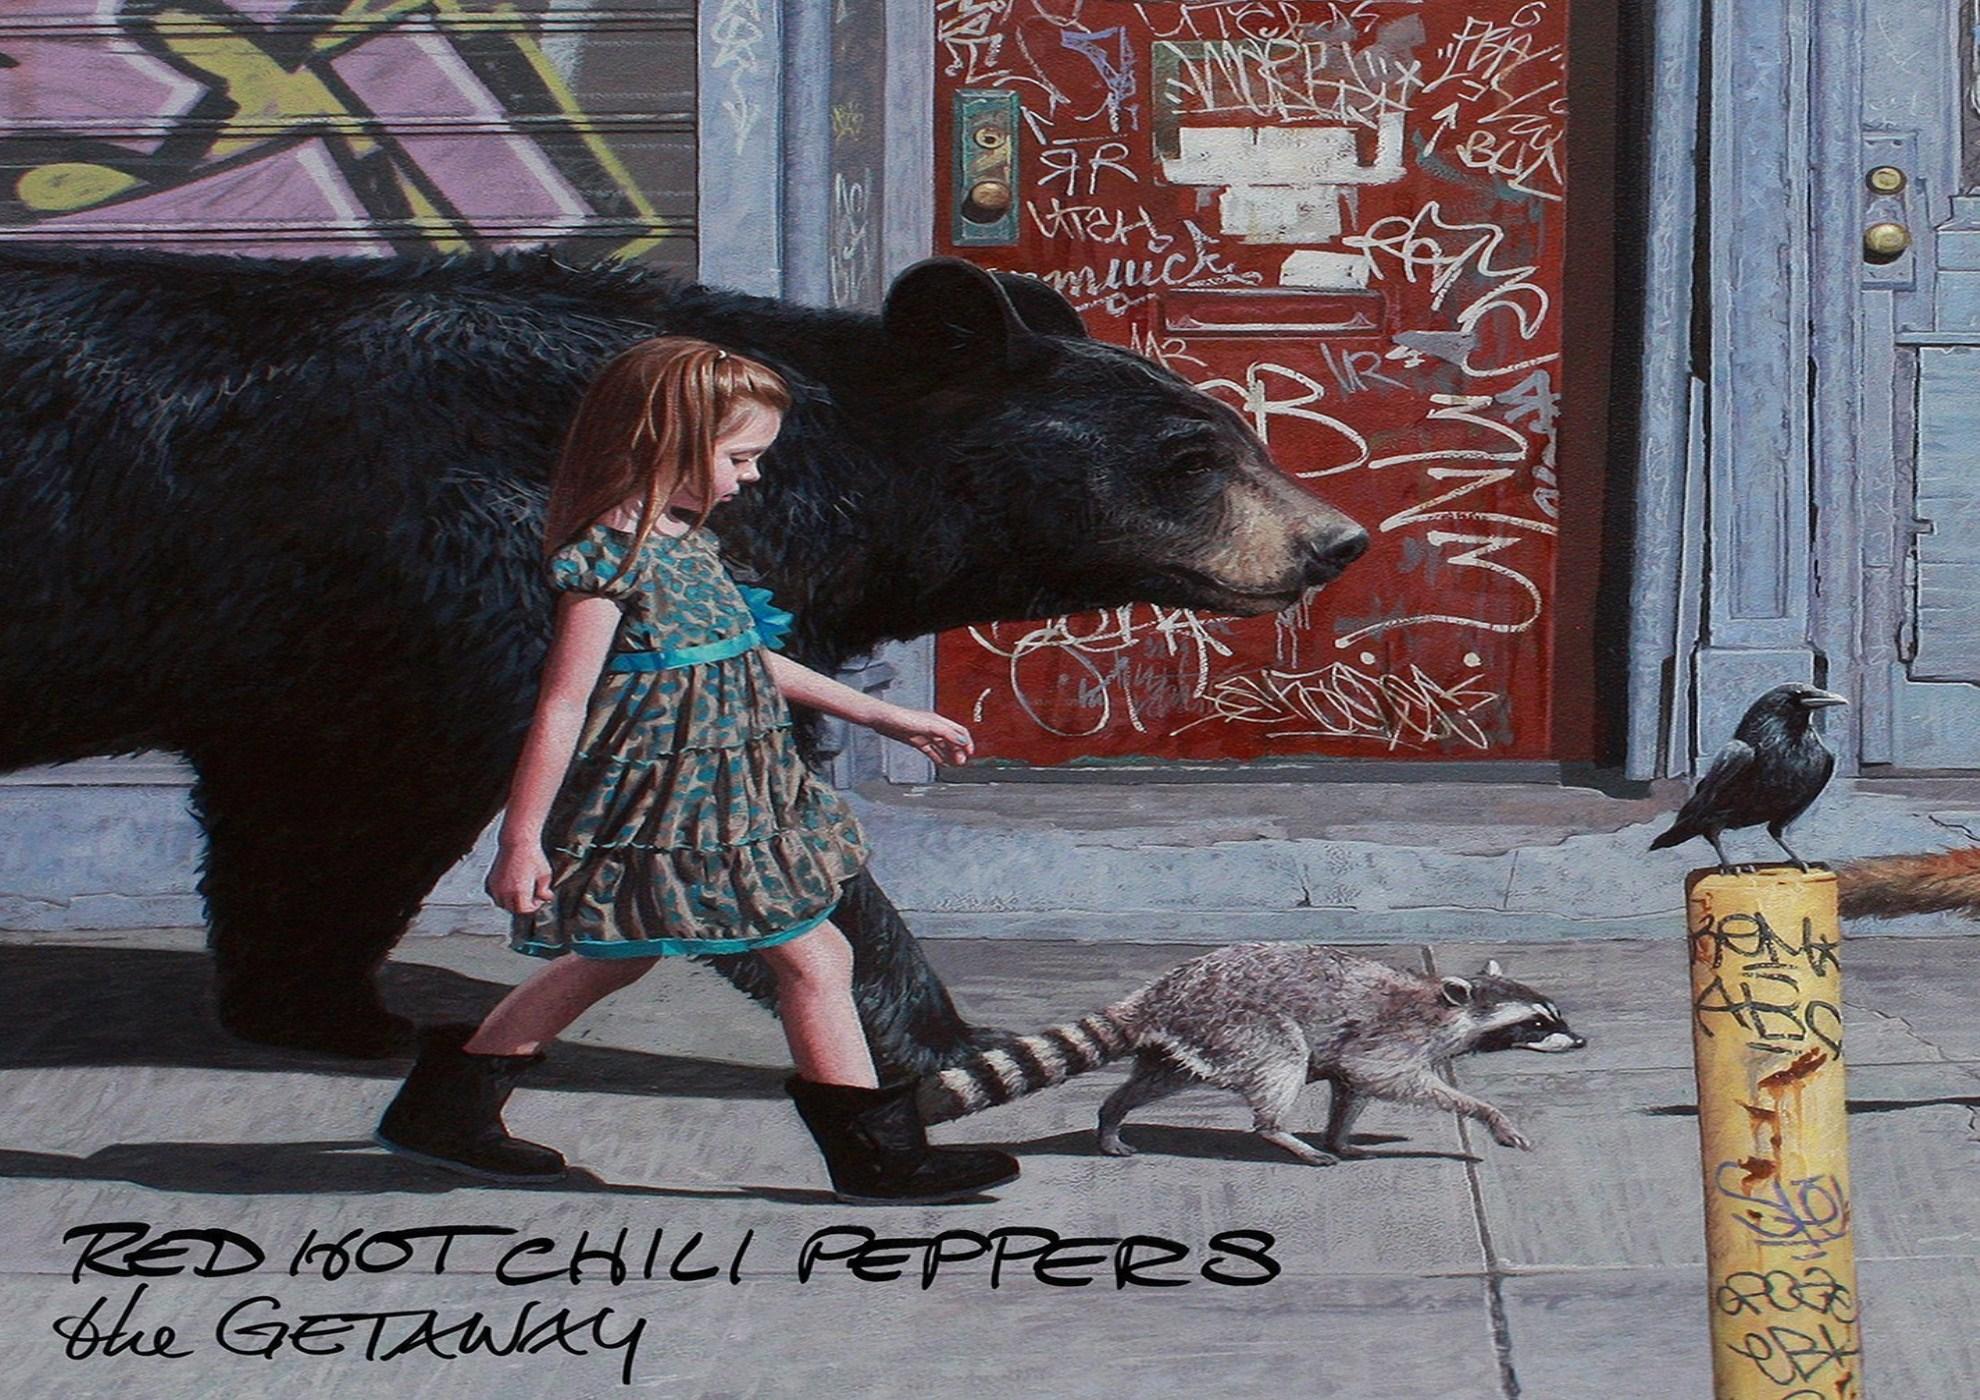 Red hot chili peppers necessities. Red hot Chili Peppers the Getaway 2016. The Getaway альбом Red hot Chili Peppers. Red hot Chili Peppers - the Getaway - 2016 - LP. The Getaway Red hot Chili Peppers обложка.